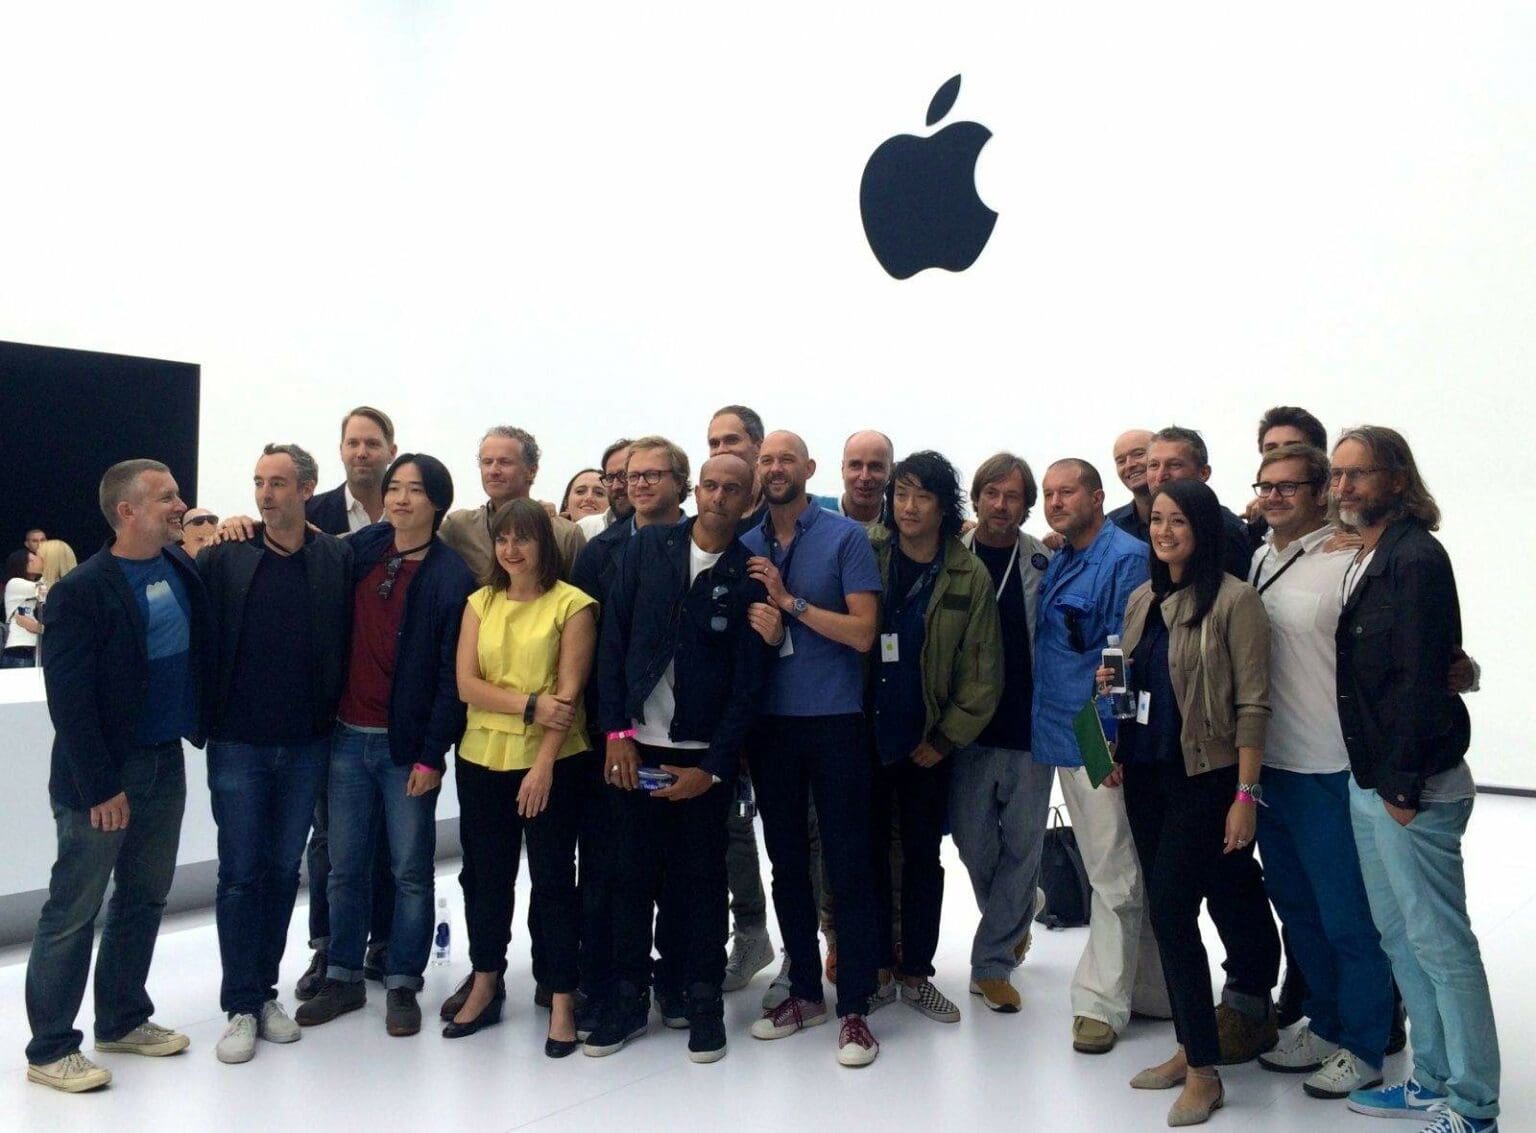 Evans Hankey, fourth from left in the front row, is leaving Apple.